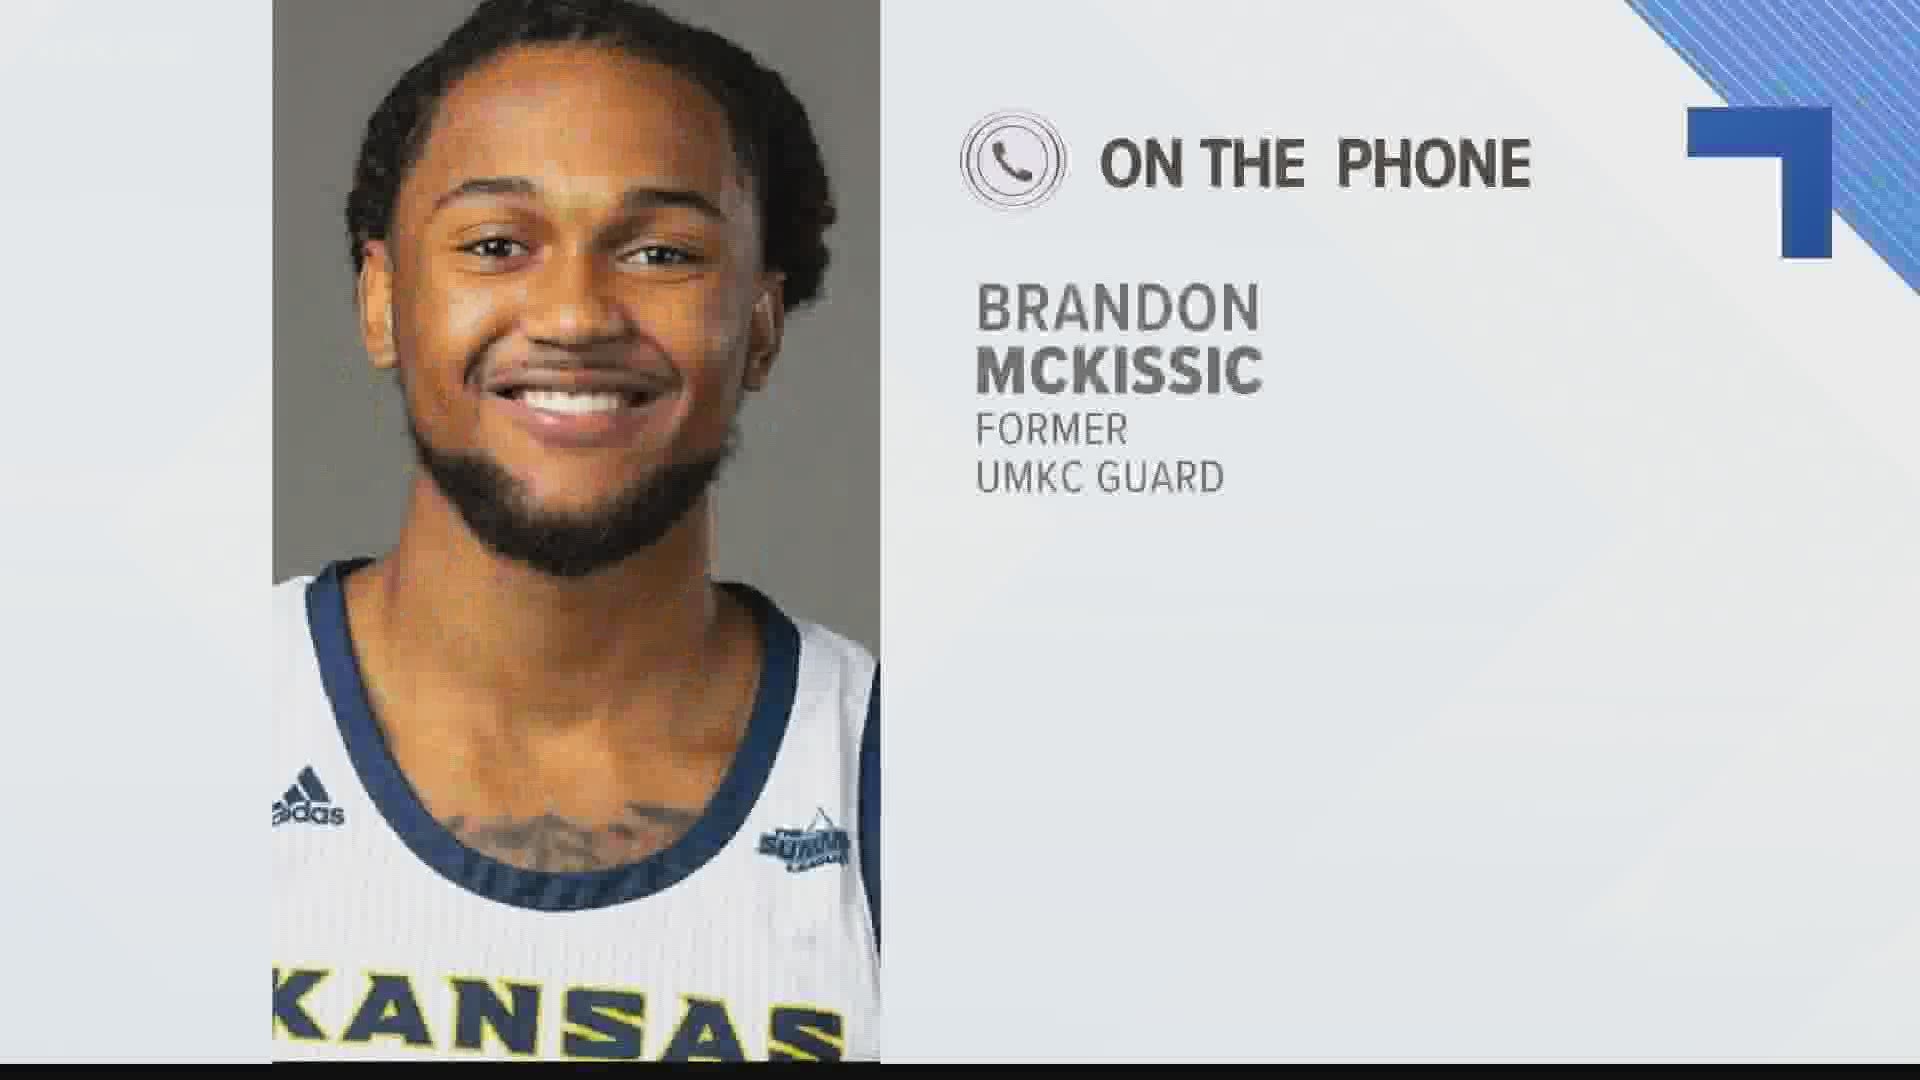 Brandon McKissic could be a fit for Mizzou